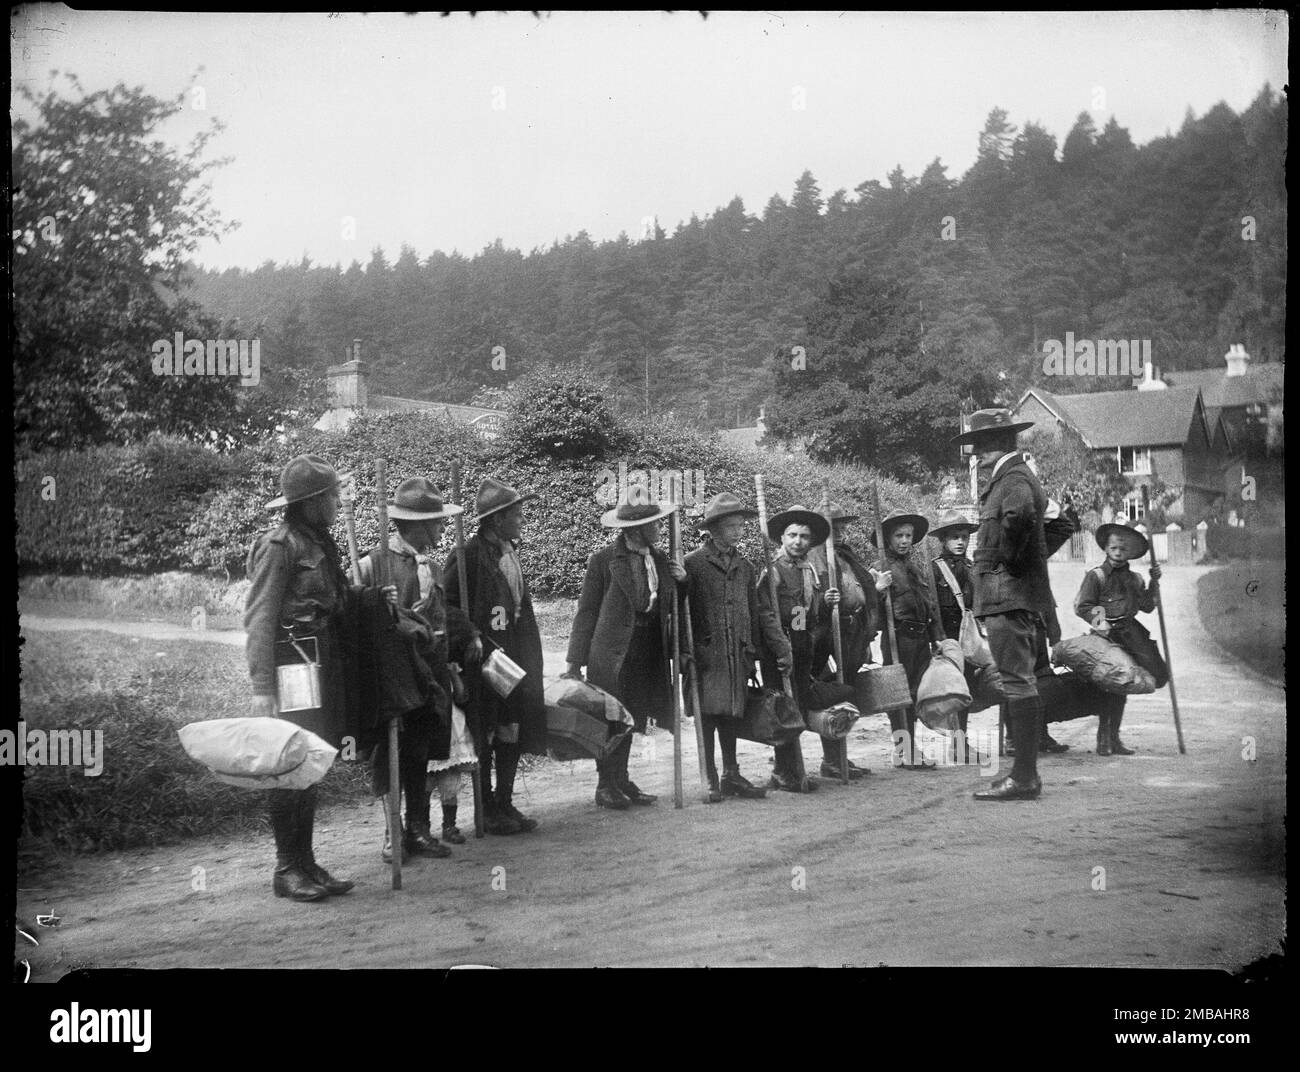 Holmbury St Mary, Shere, Guildford, Surrey, 1912. A line of boy scouts and their scout master standing on a road in Holmbury St Mary. The scouts are carrying scout staffs and bedrolls for a camping or pioneering trip. Stock Photo